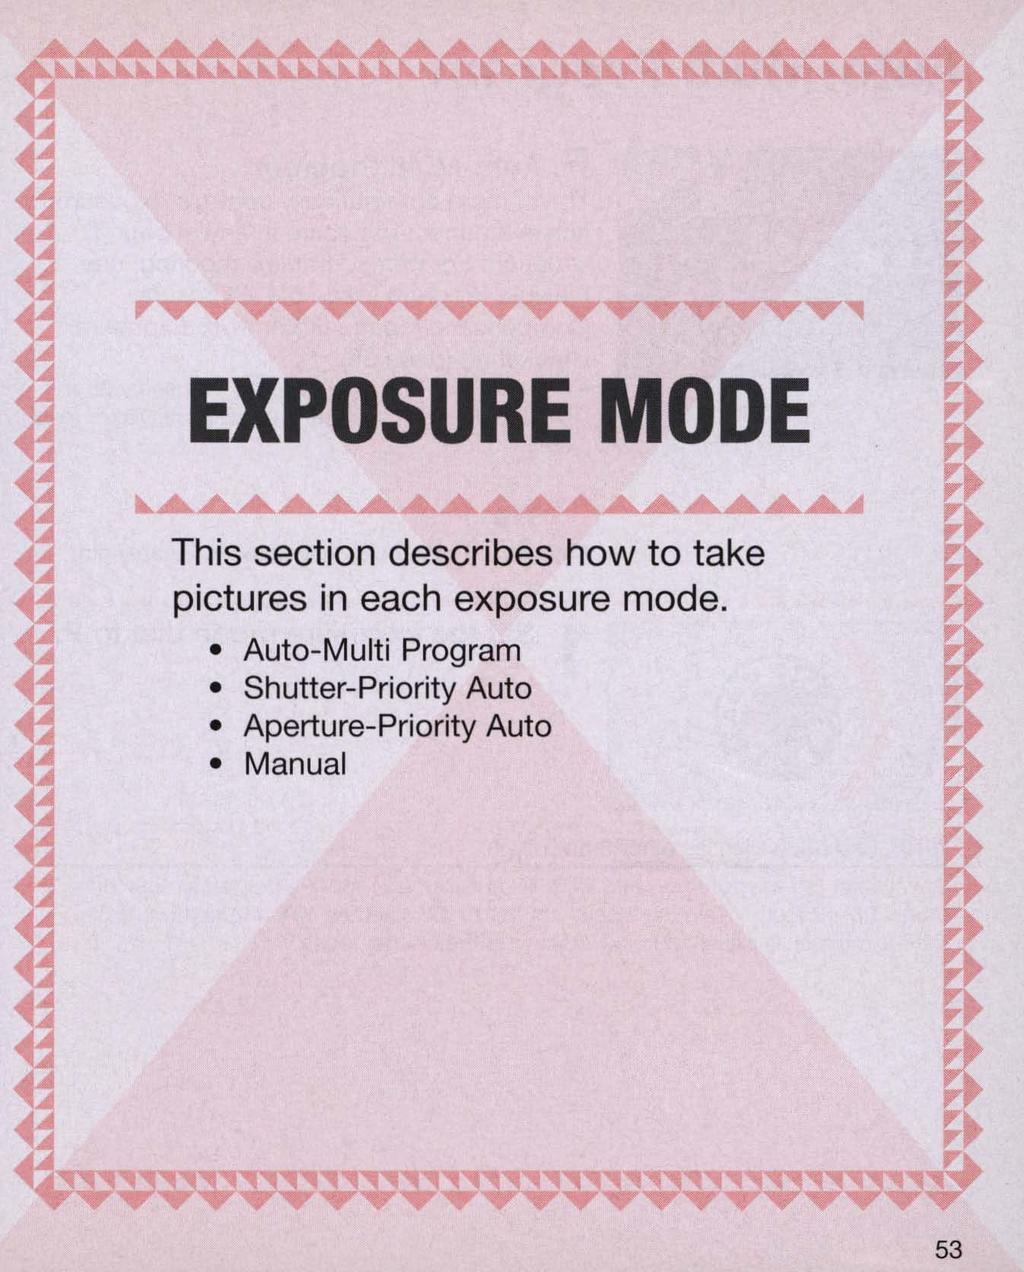 ,.,.,.,.,.,.,.,.,.,.,.,.,.,.,.,.,.,....,.,. EXPOSURE MODE This section describes how to take pictures in each exposure mode.